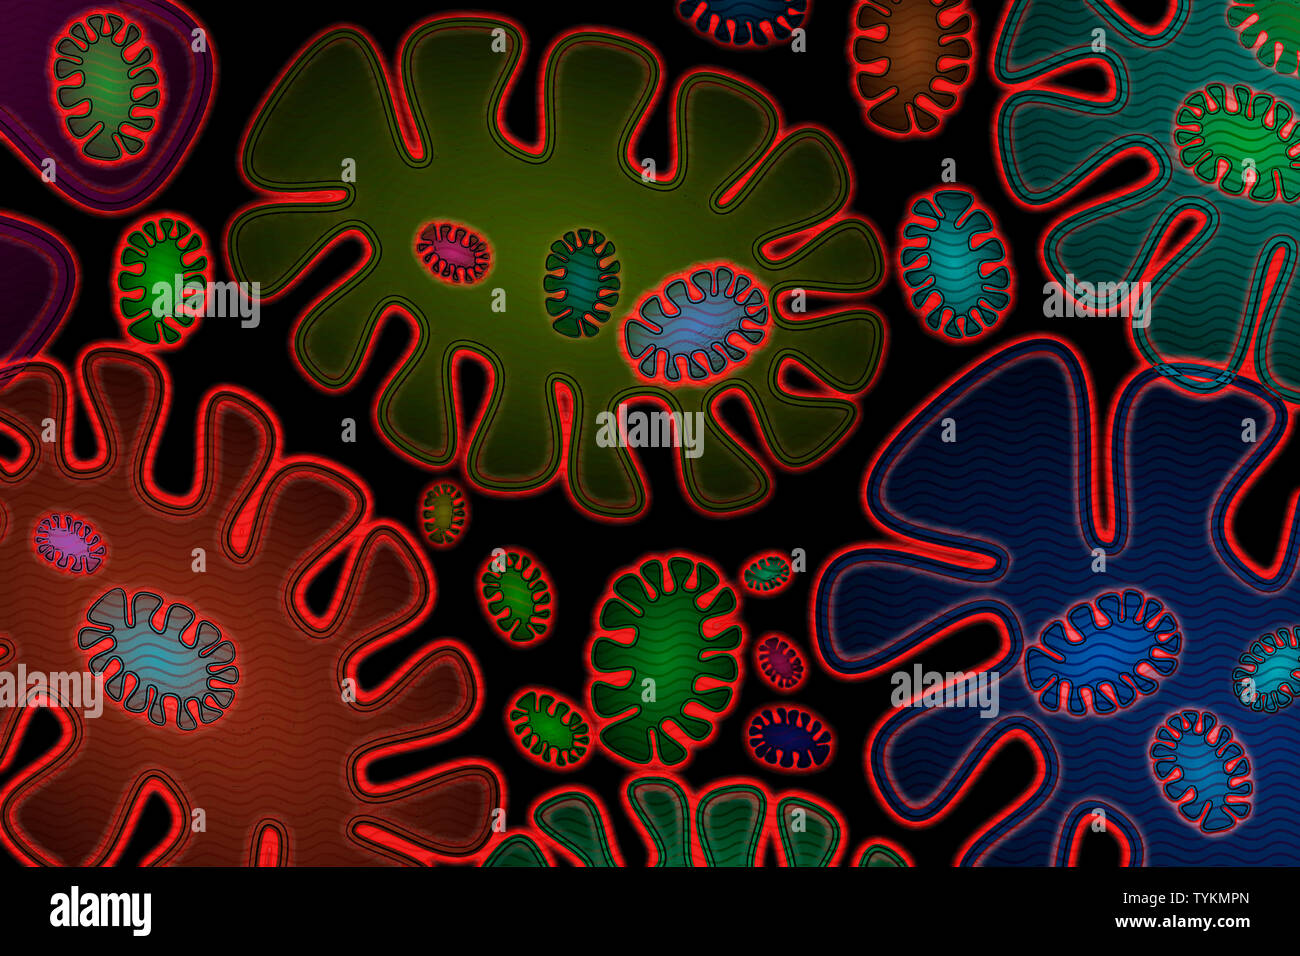 Synthetic Biology - Artificial Life - Abstract Illustration Stock Photo